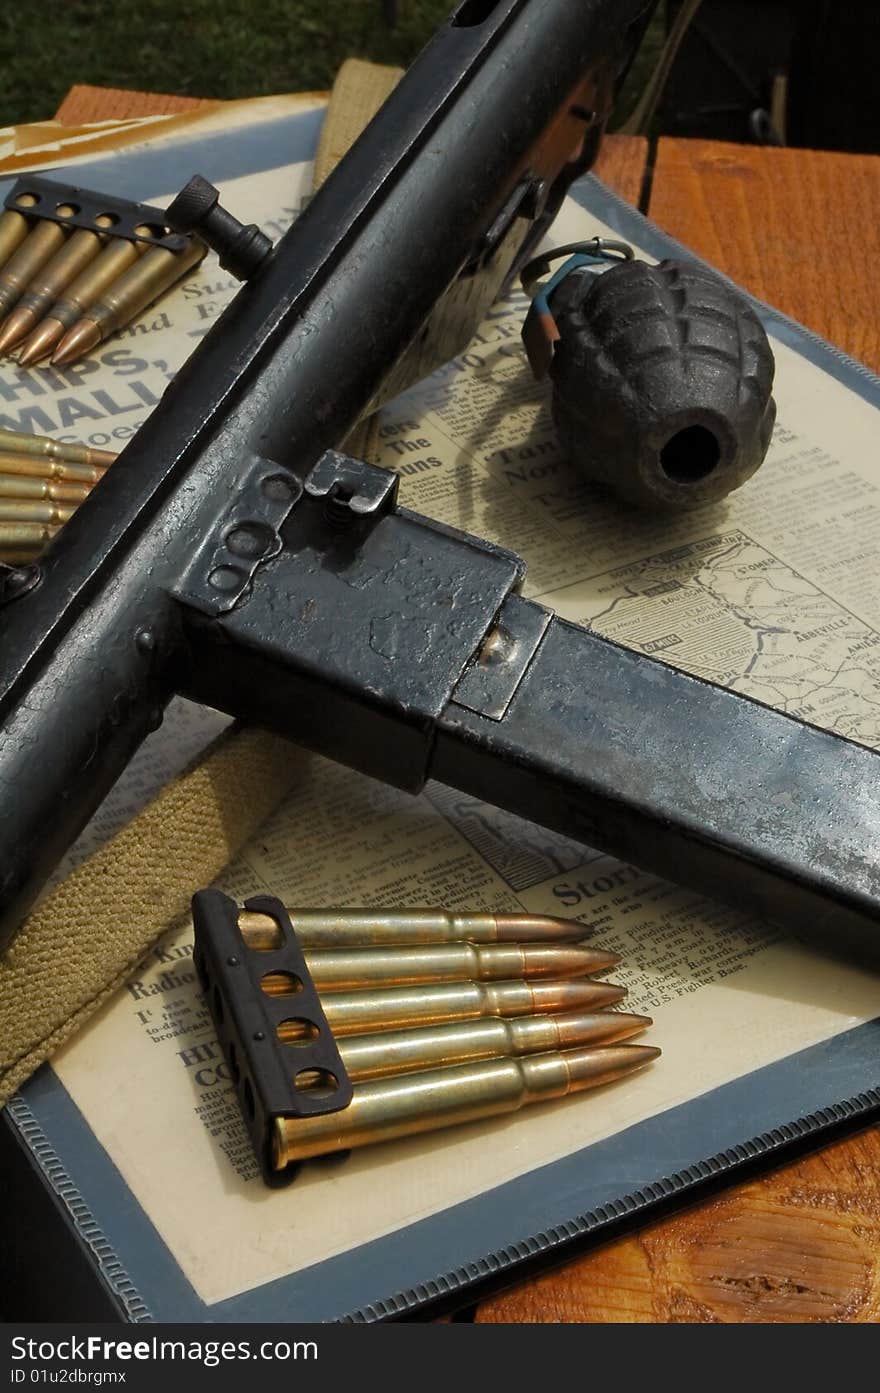 Vintage ww2 weapons and other wartime memorabila